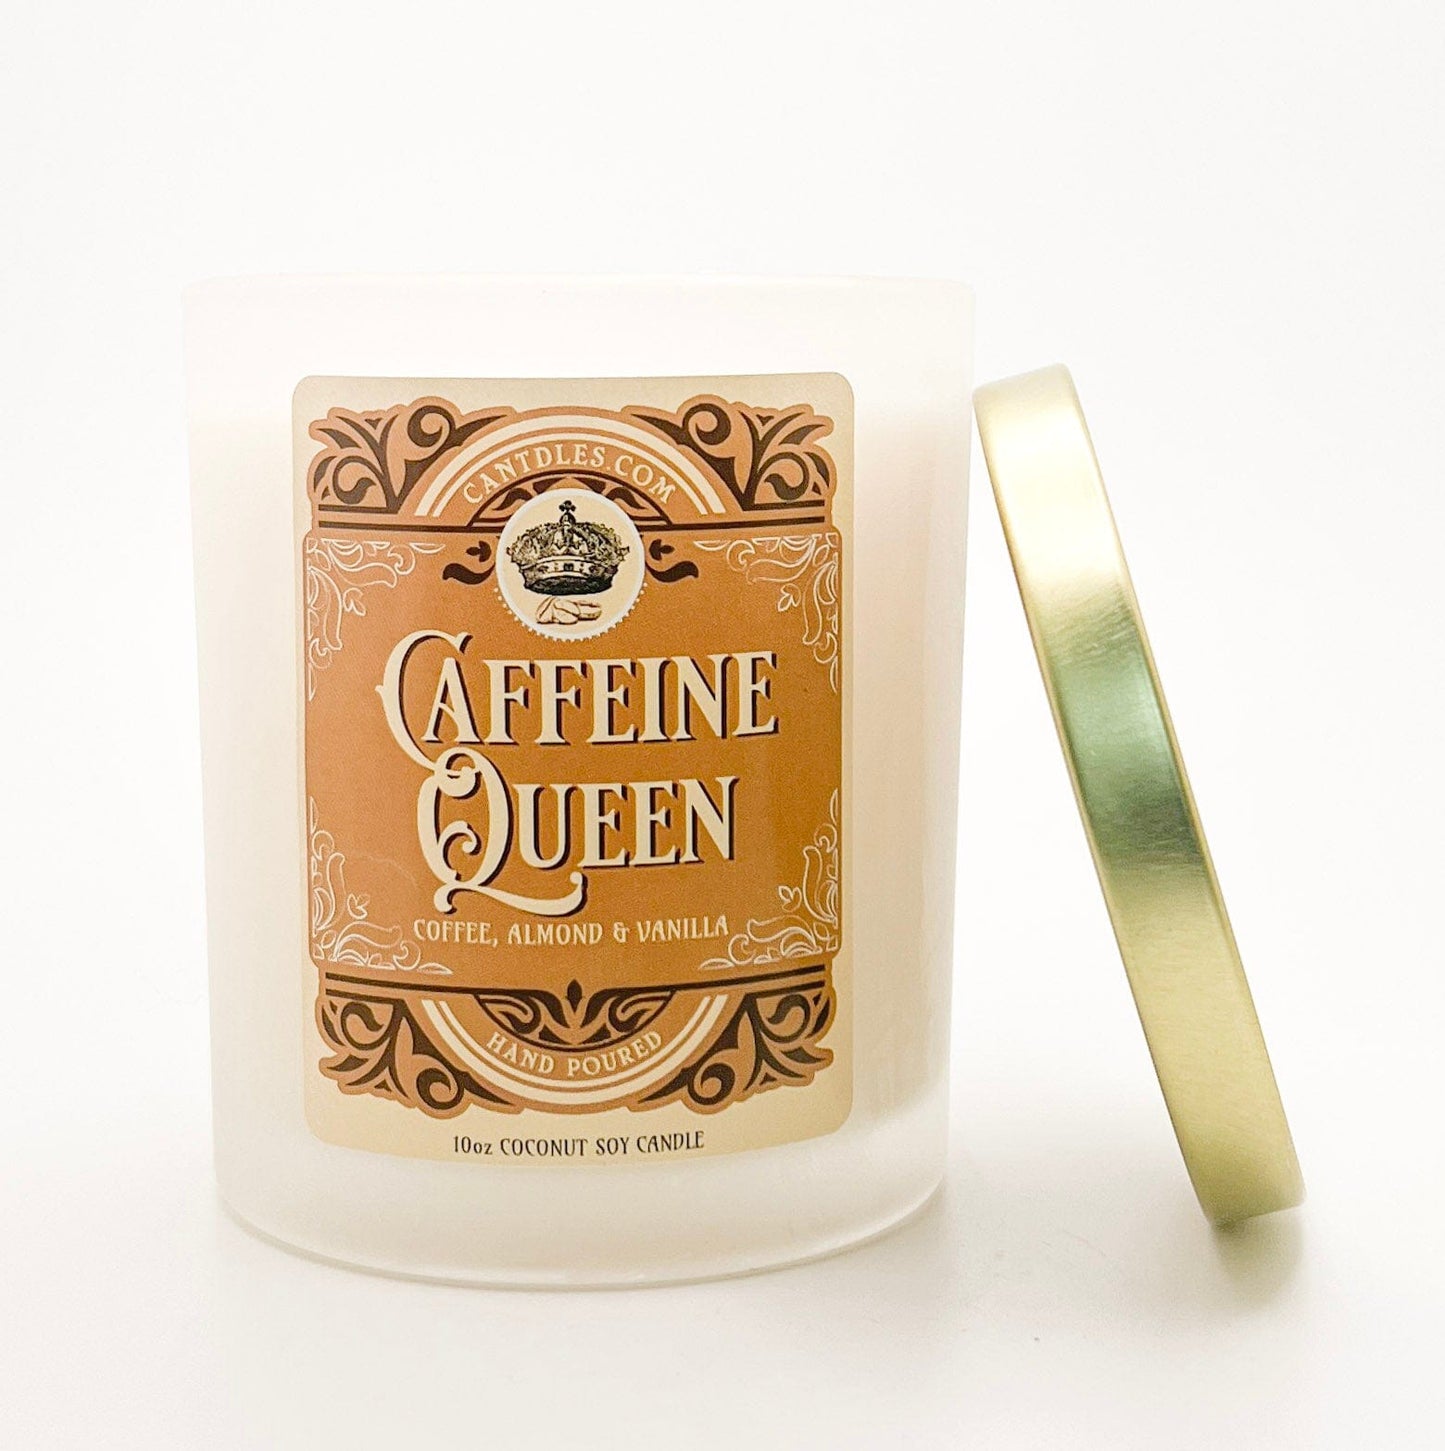 Can'tdles Candles Caffeine Queen: Fresh Coffee, Almond and Vanilla